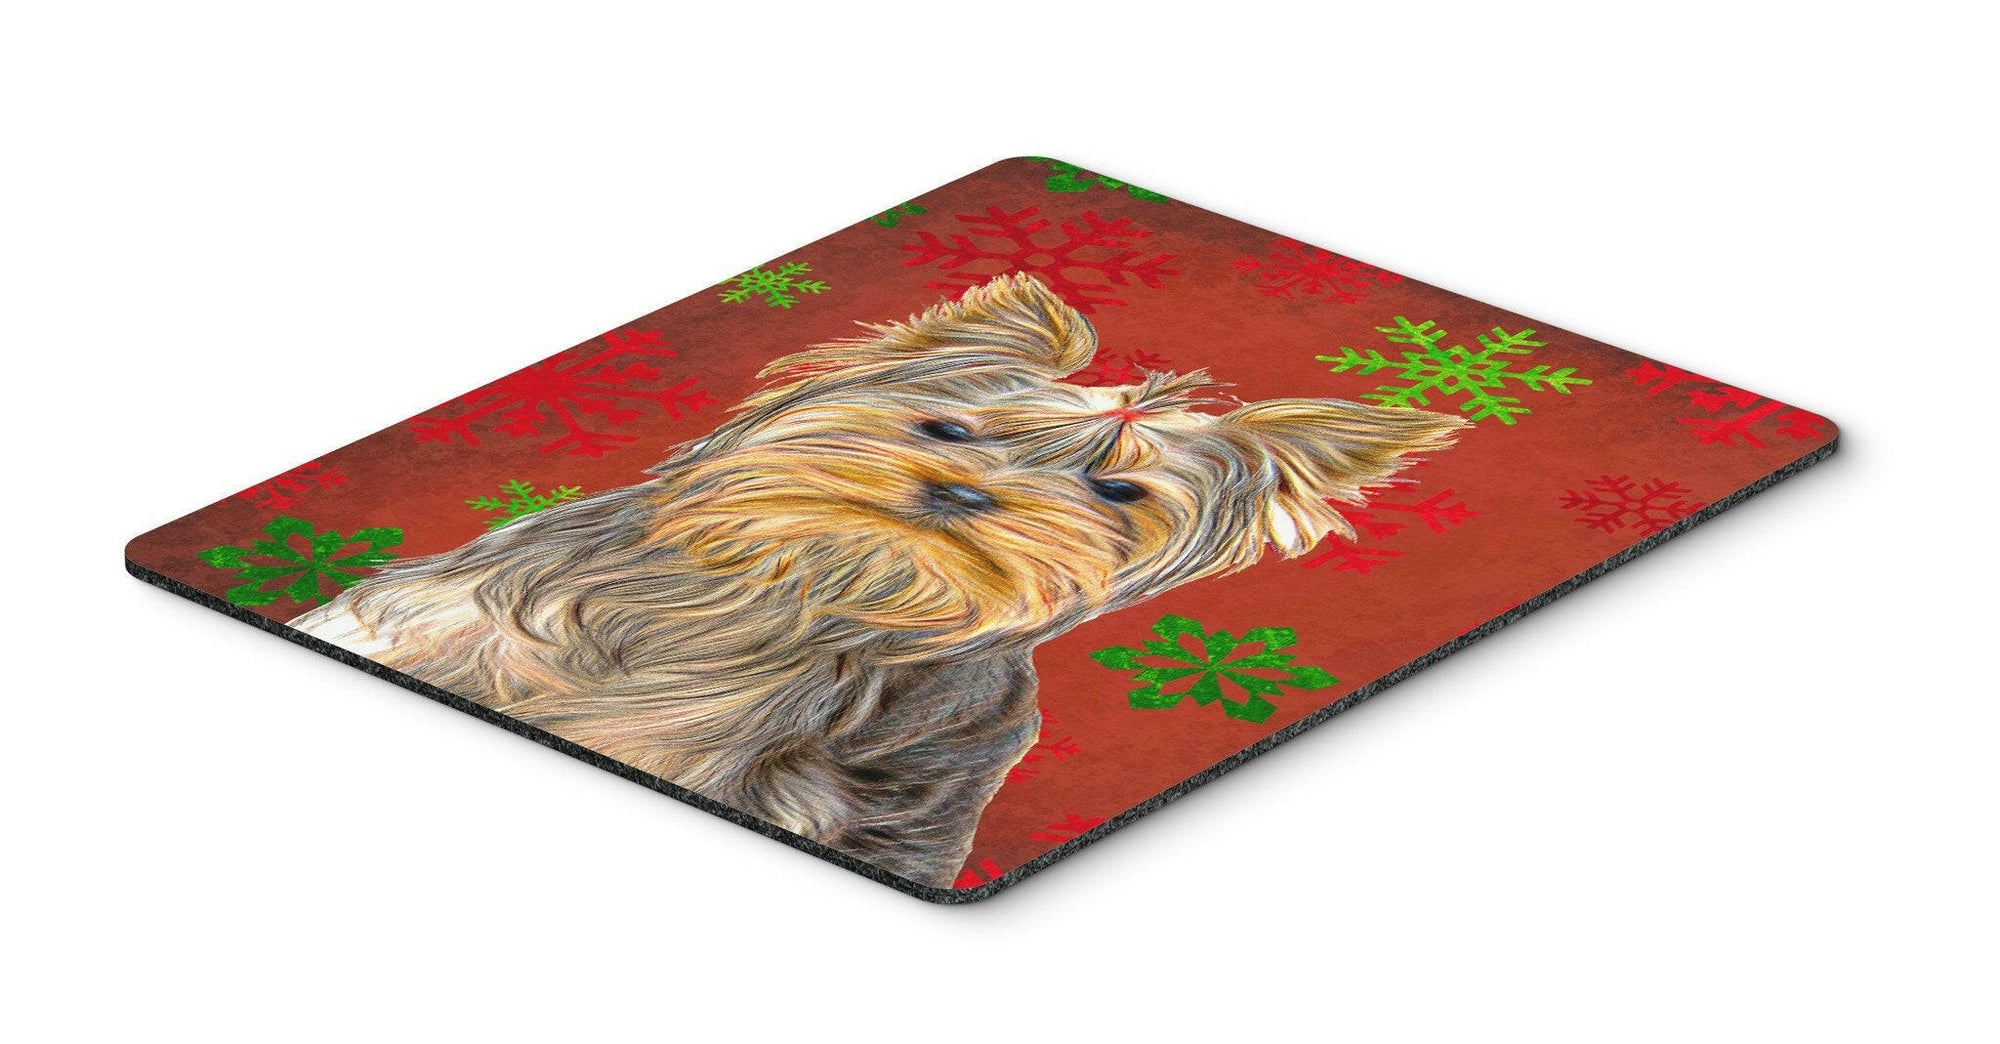 Red Snowflakes Holiday Christmas  Yorkie / Yorkshire Terrier Mouse Pad, Hot Pad or Trivet KJ1184MP by Caroline's Treasures